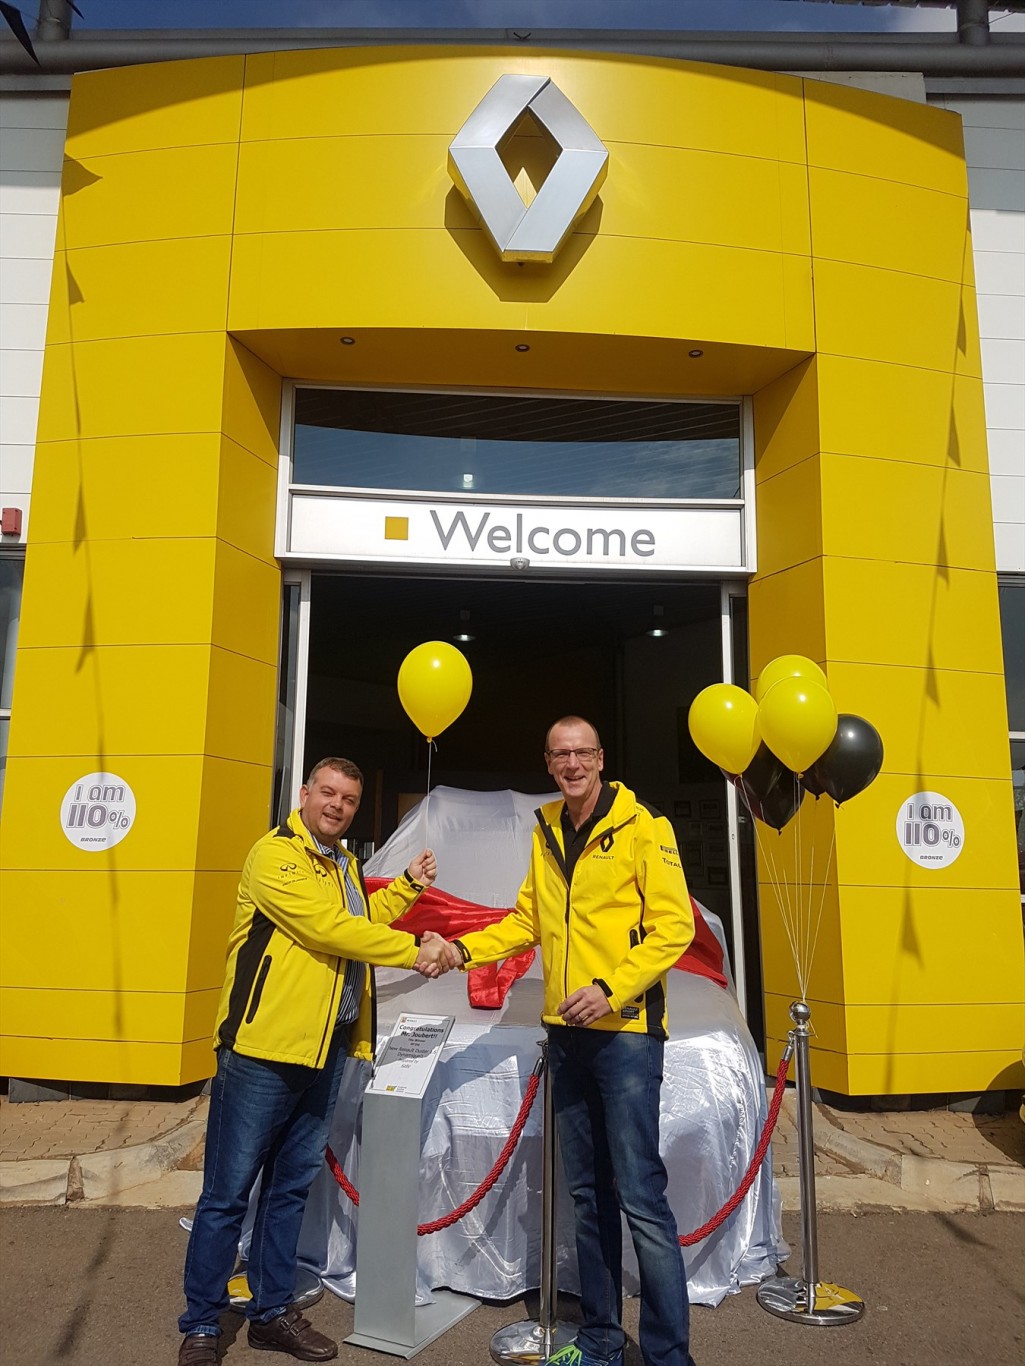 Renault South Africa embarked on a nationwide Test-Drive Campaign under RENAULT’S PHAT DRIVE